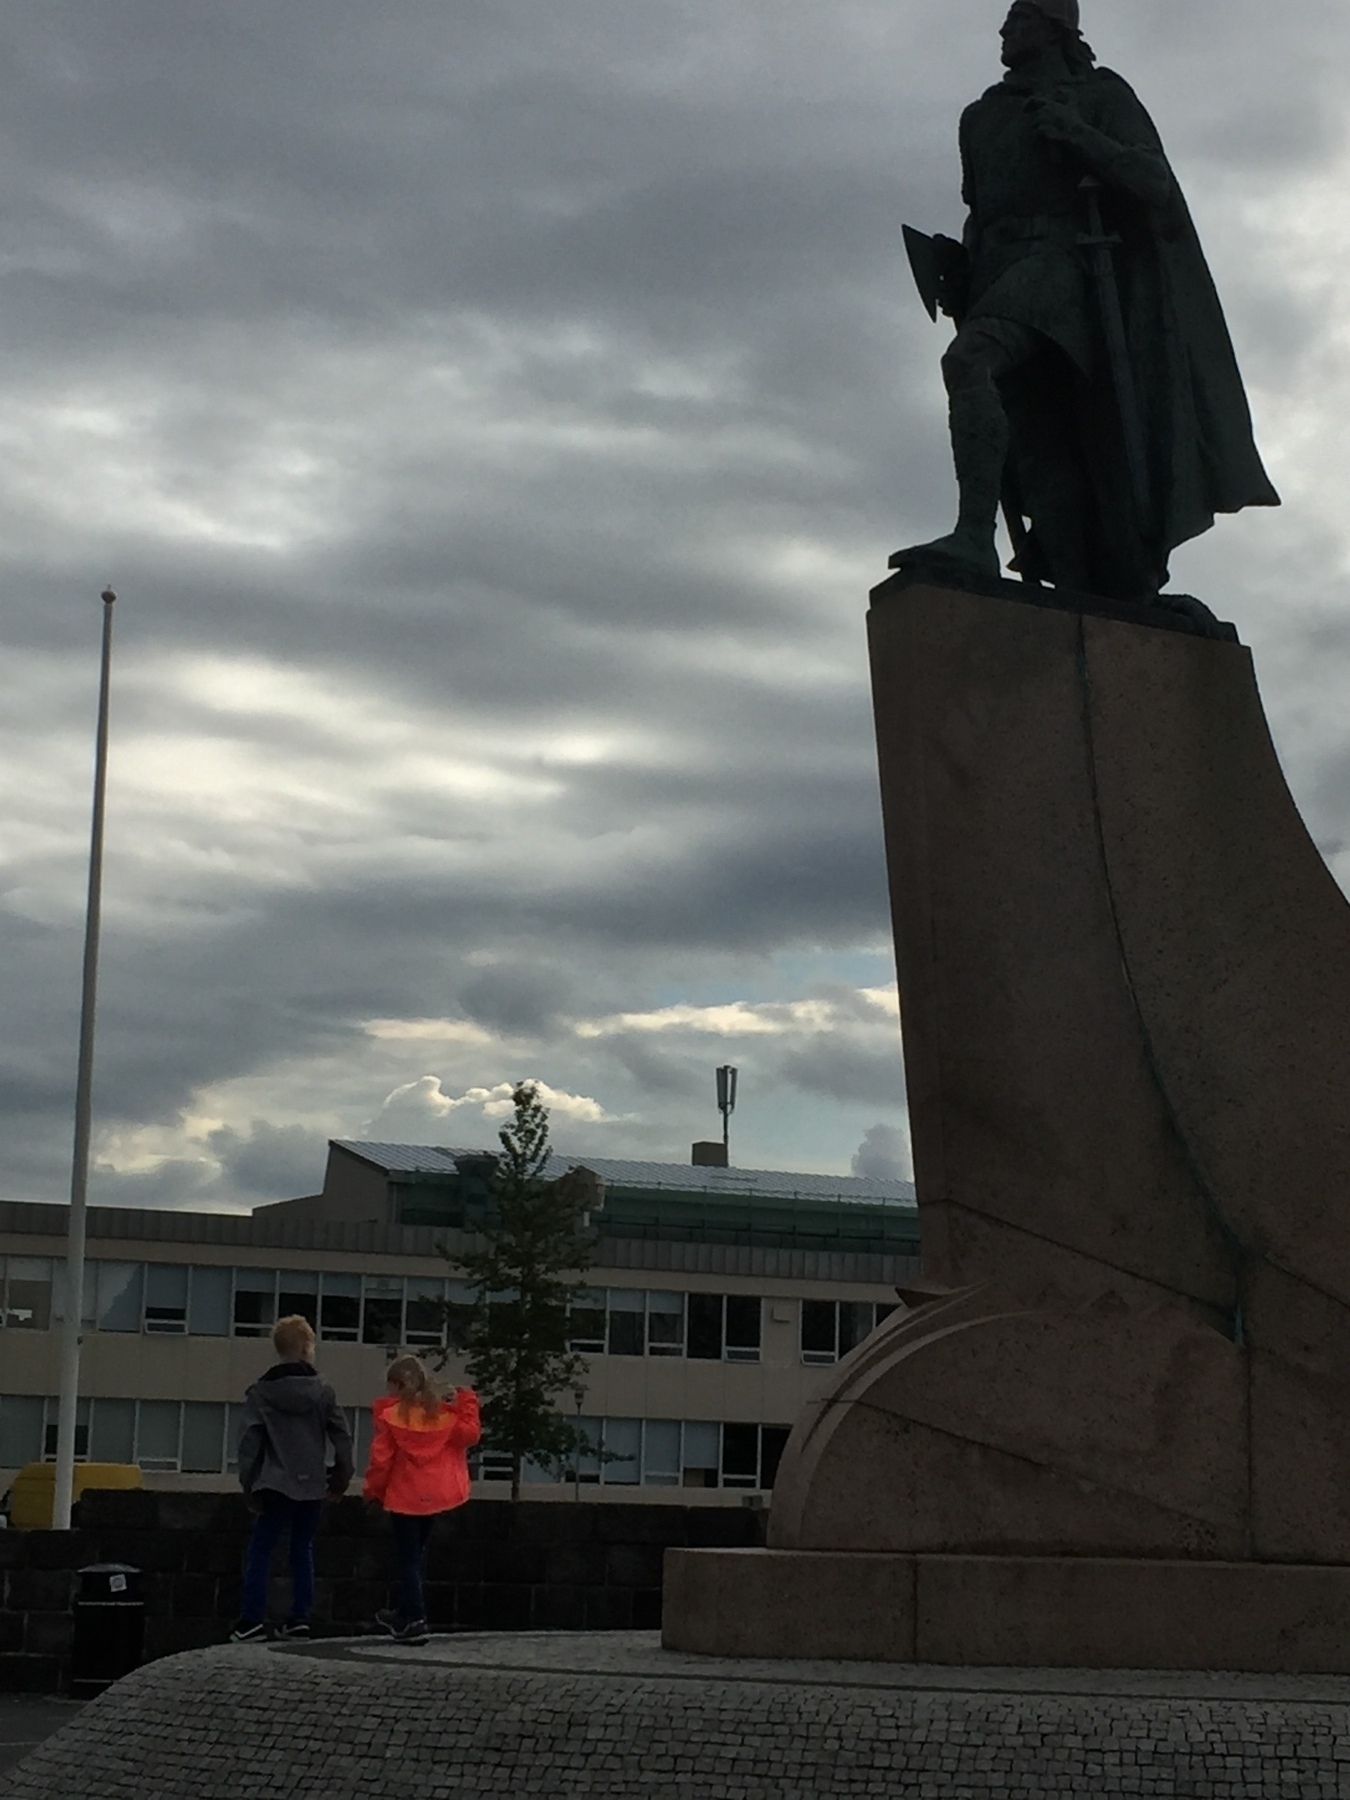 Statue in Reykjavik with two children in the foreground.  One is in a brightly covered jacket which stands out in an an otherwise largely monochrome picture.